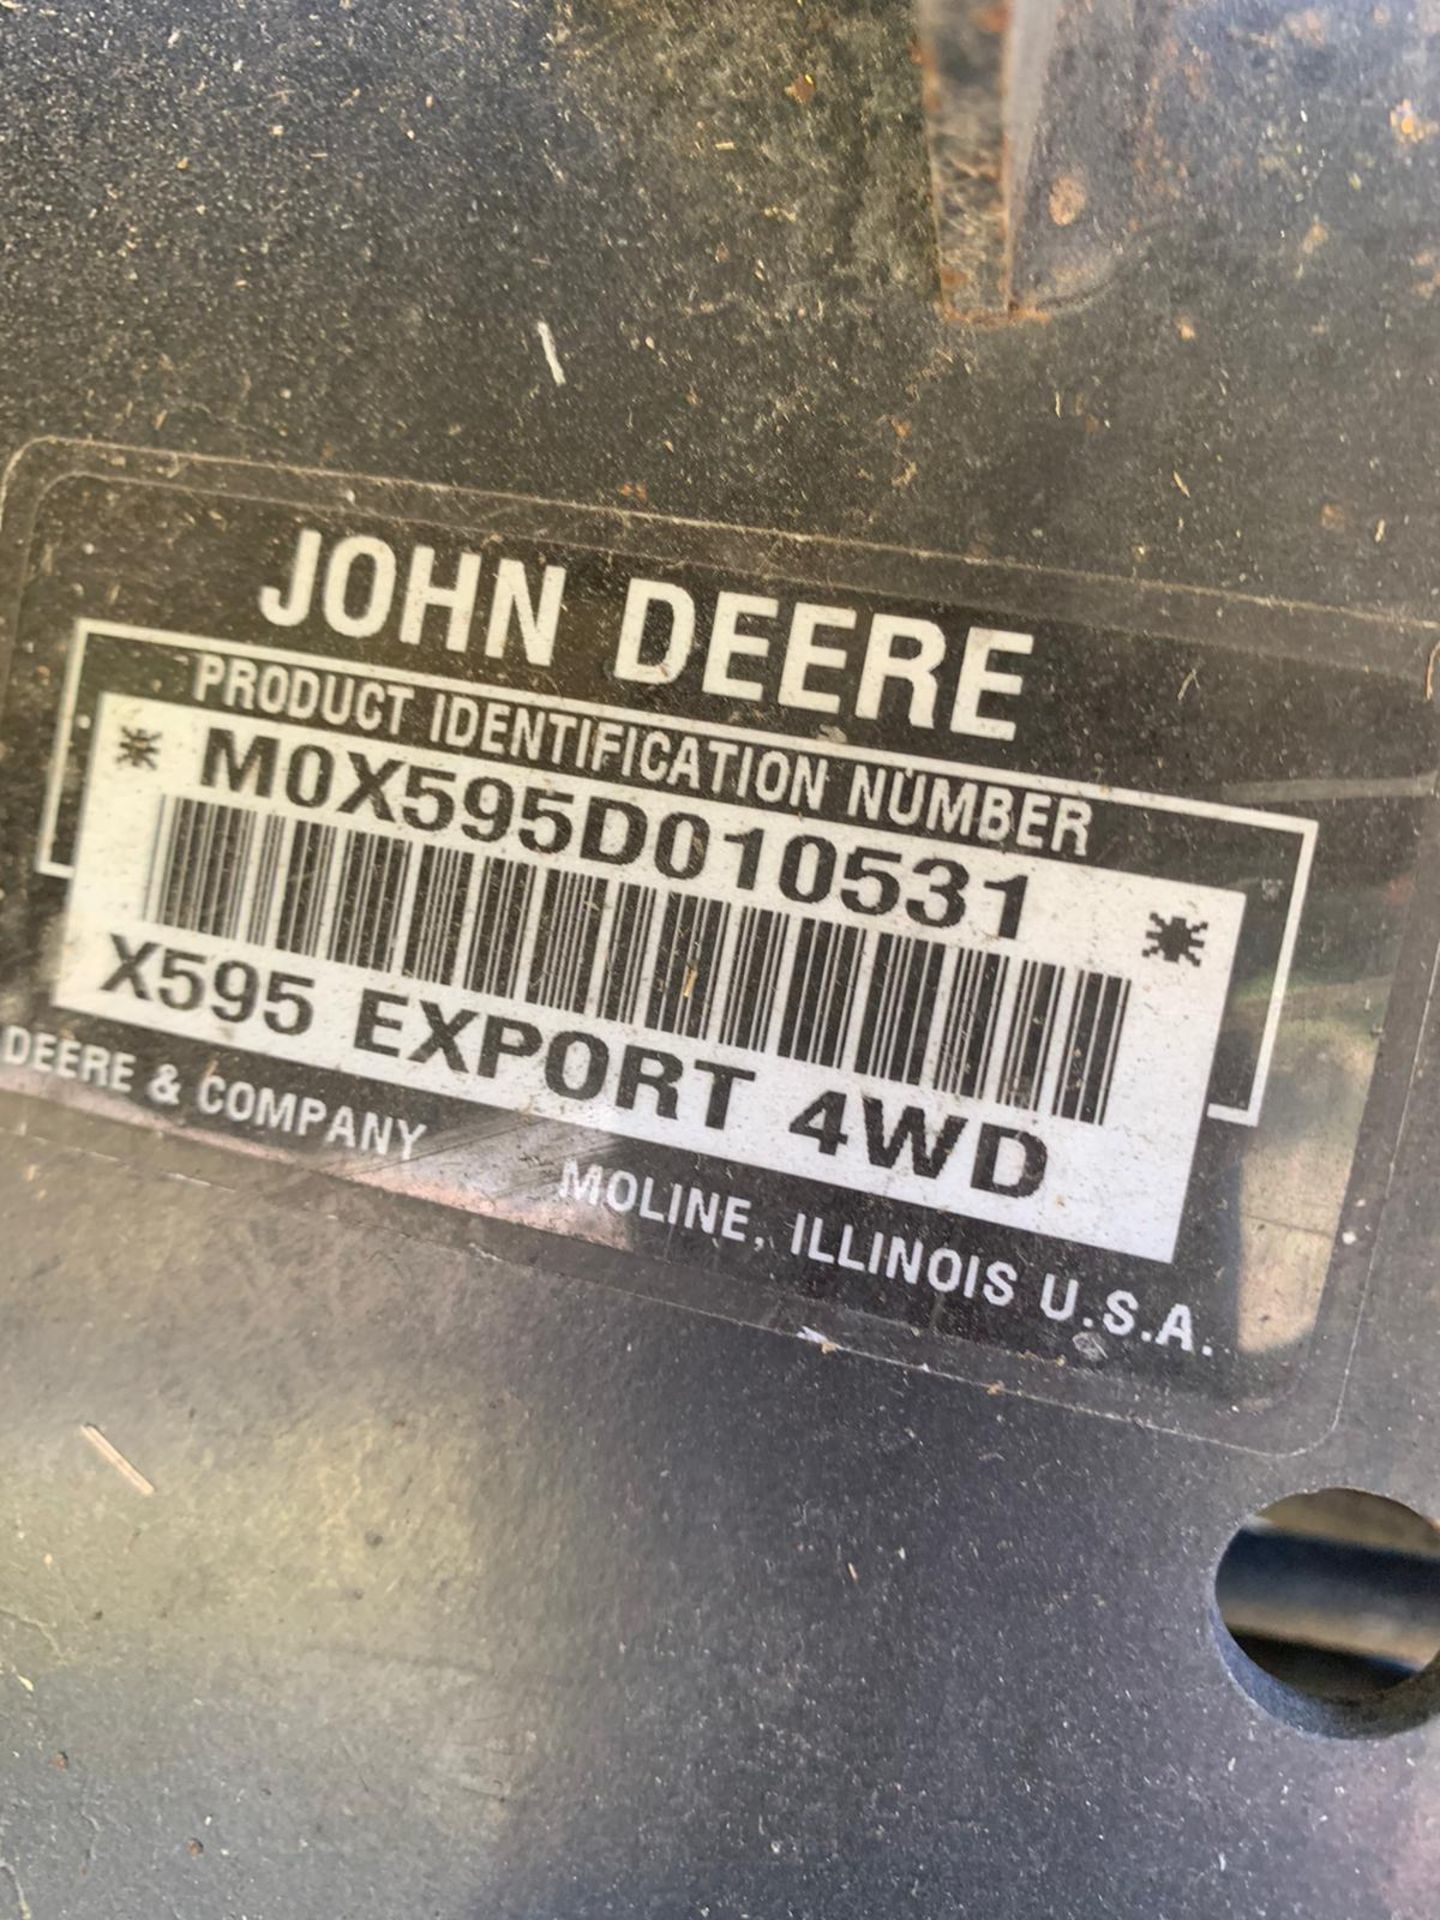 JOHN DEERE X595 RIDE ON LAWN MOWER, RUNS, DRIVES AND CUTS, 2080 HOURS, FRONT WEIGHTS *PLUS VAT* - Image 16 of 16